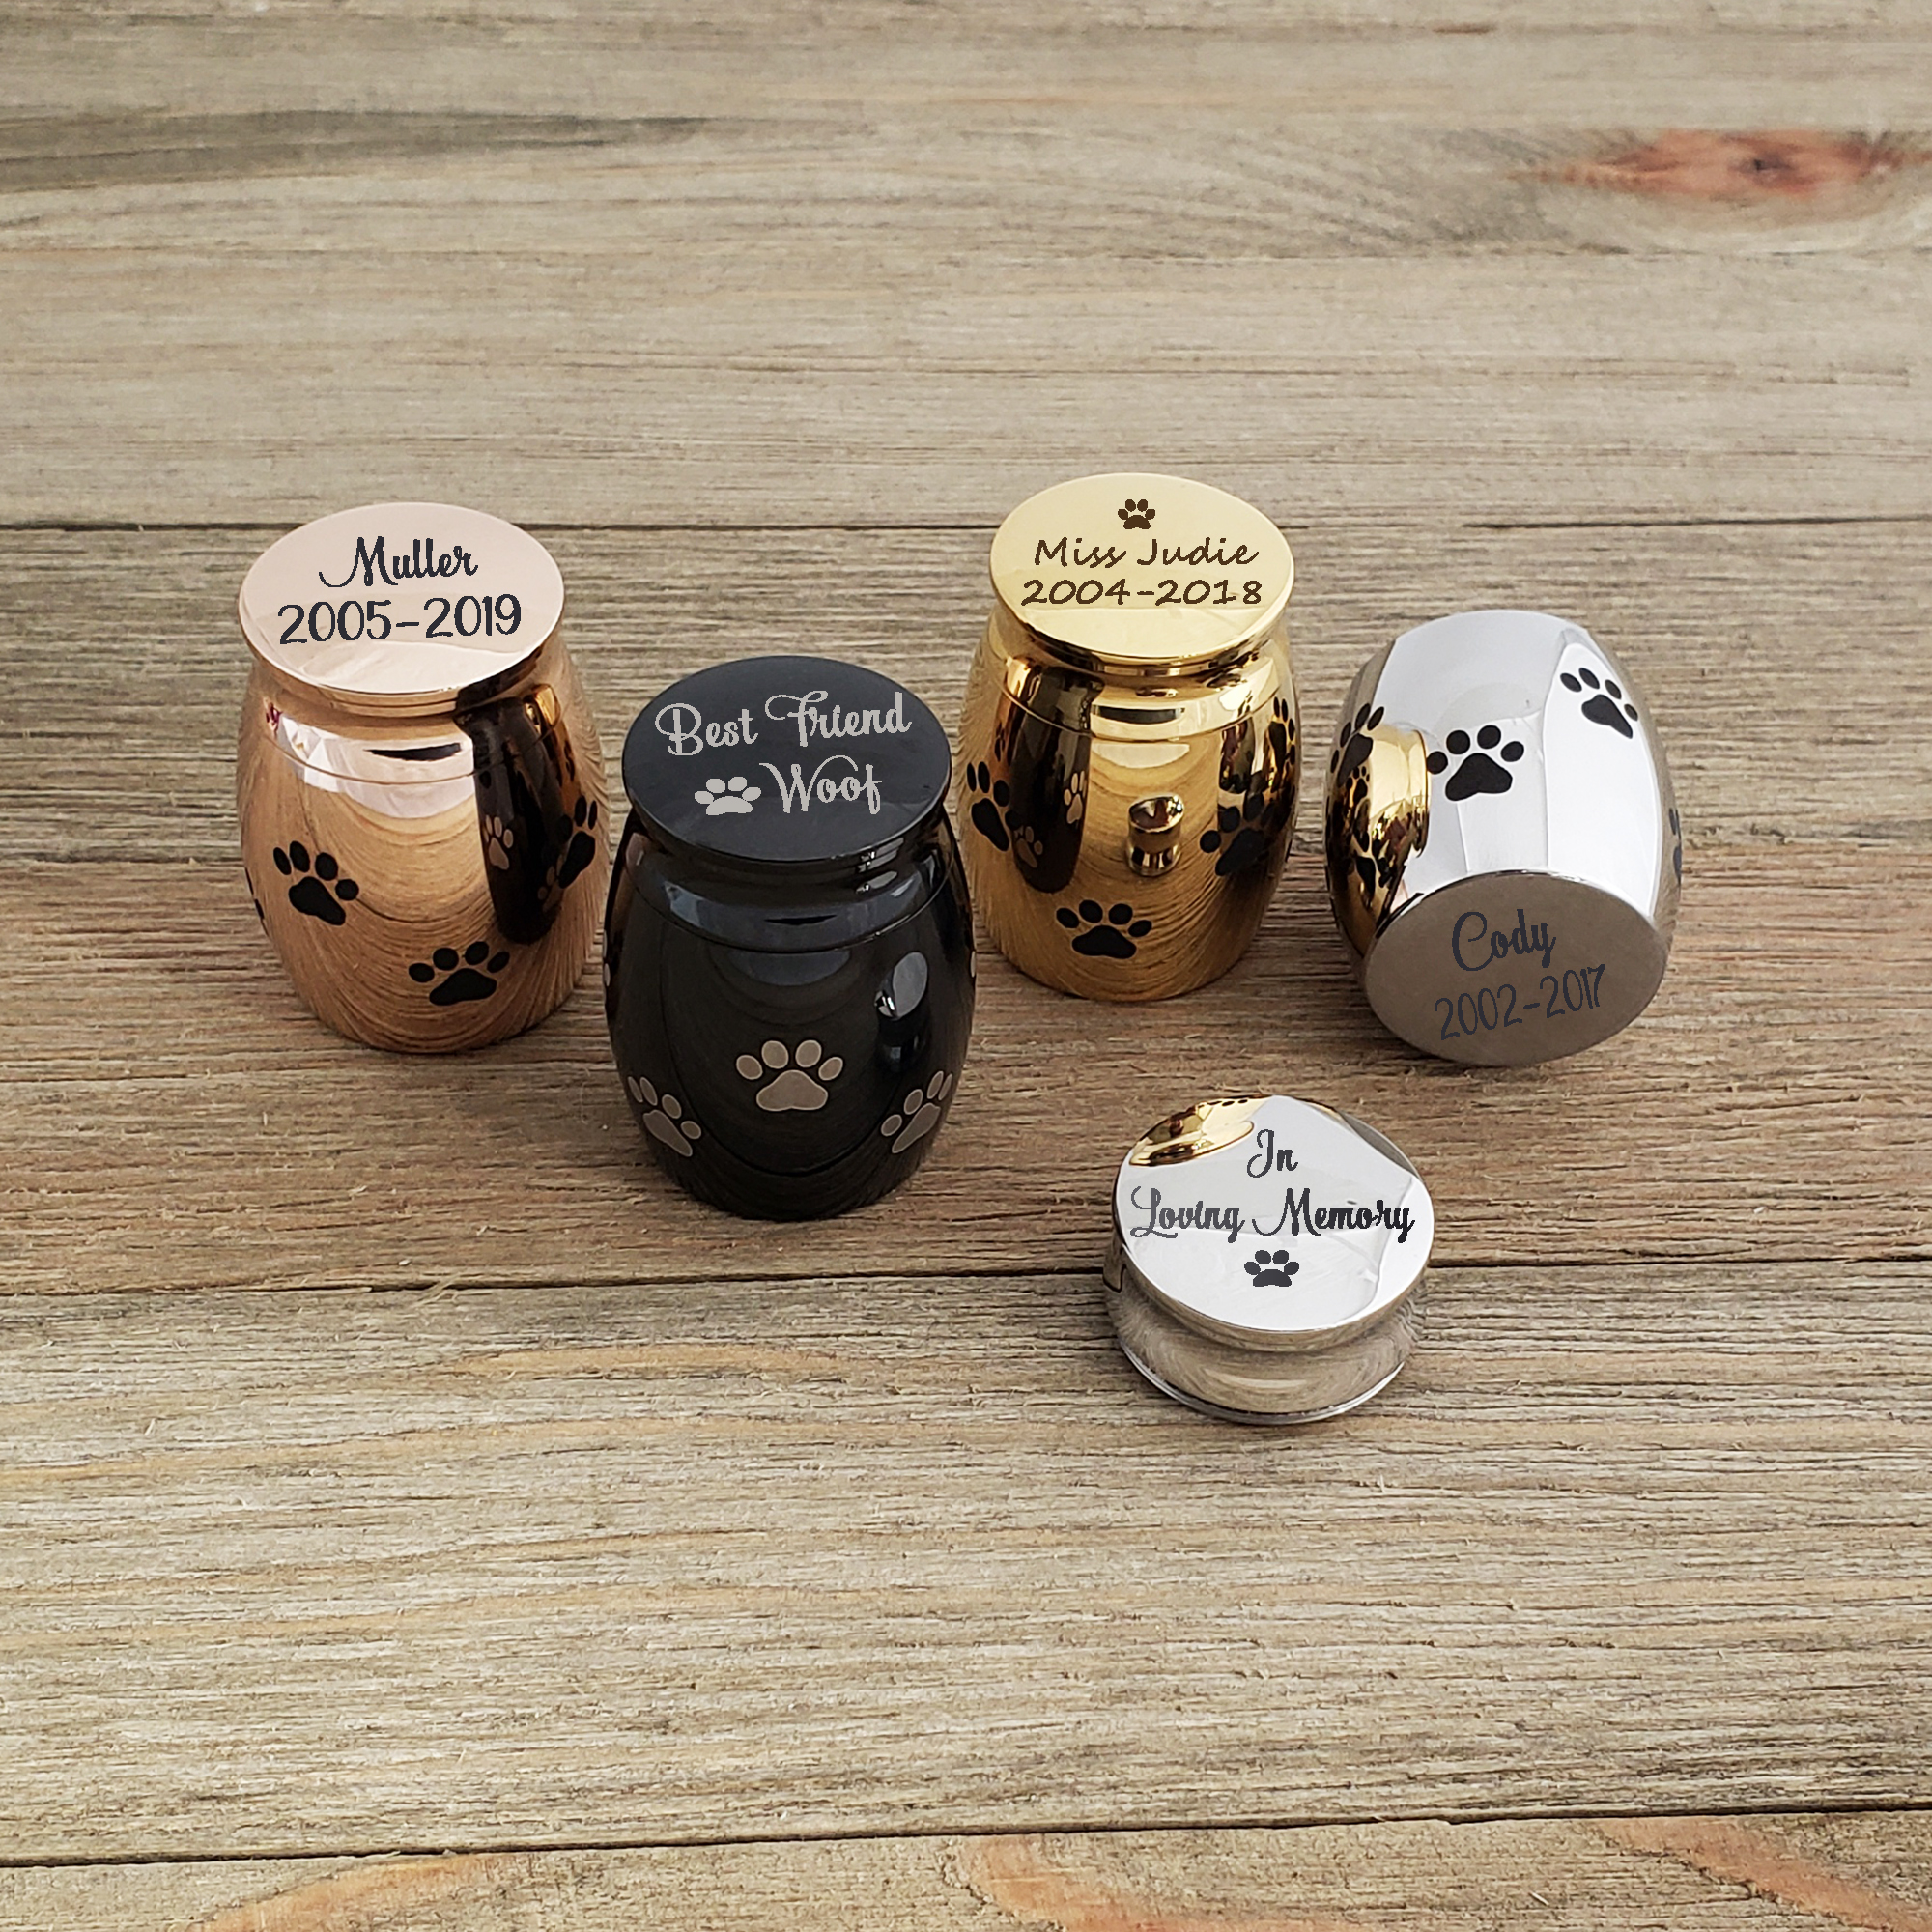 Free Engraving Anavia Personalized Mini Dog Paw Print Cremation Urn for Pet Ashes Holder 316L Stainless Steel Small Memorial Keepsake for Loved Puppy Cat Gold Plated 